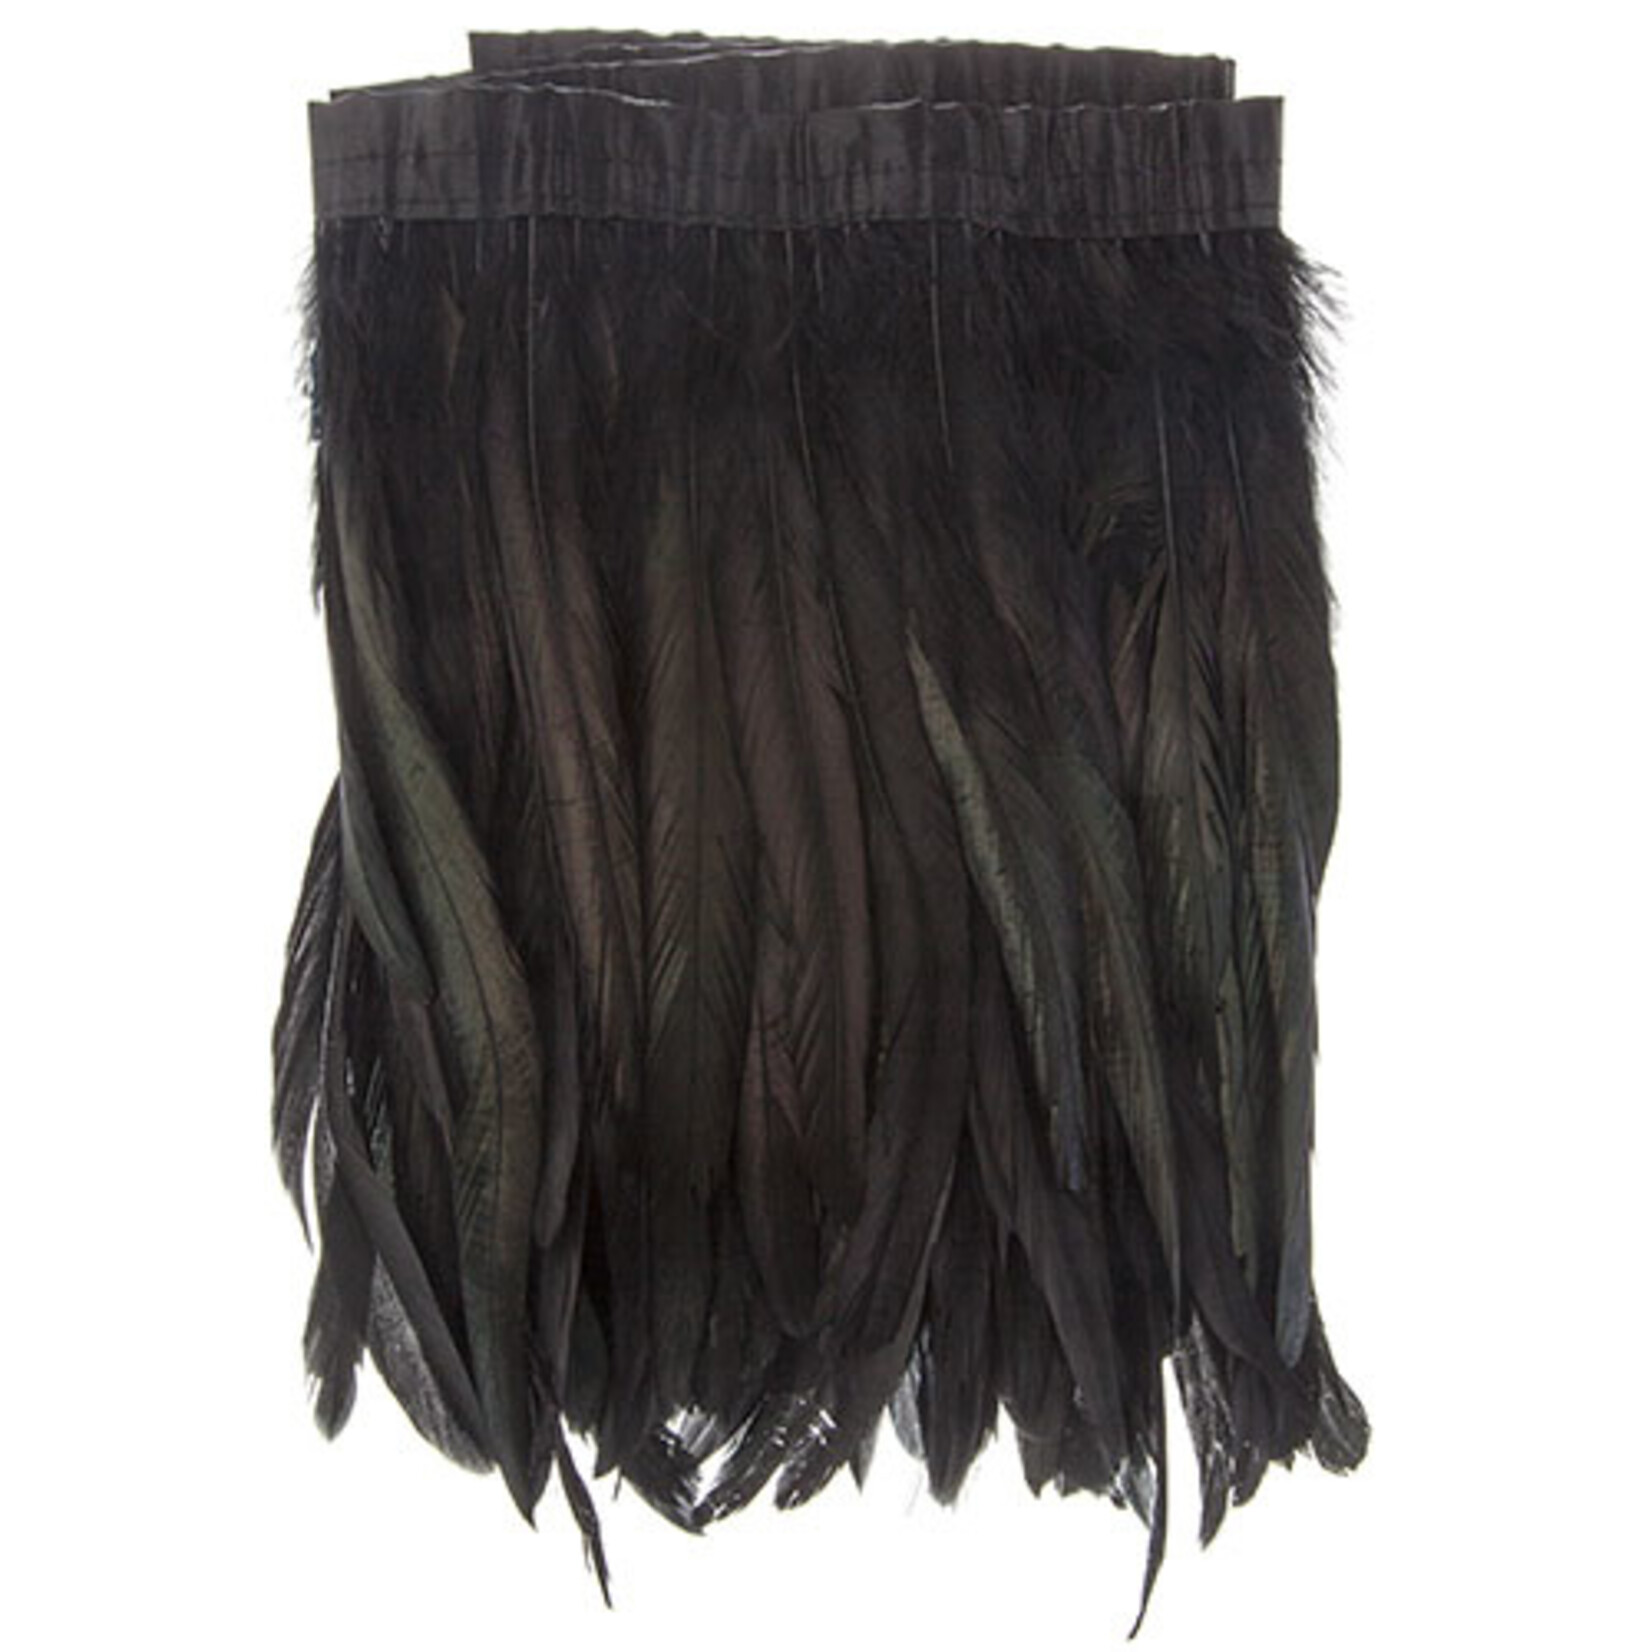 Coque Feathers Value 14-16 Inches  Black